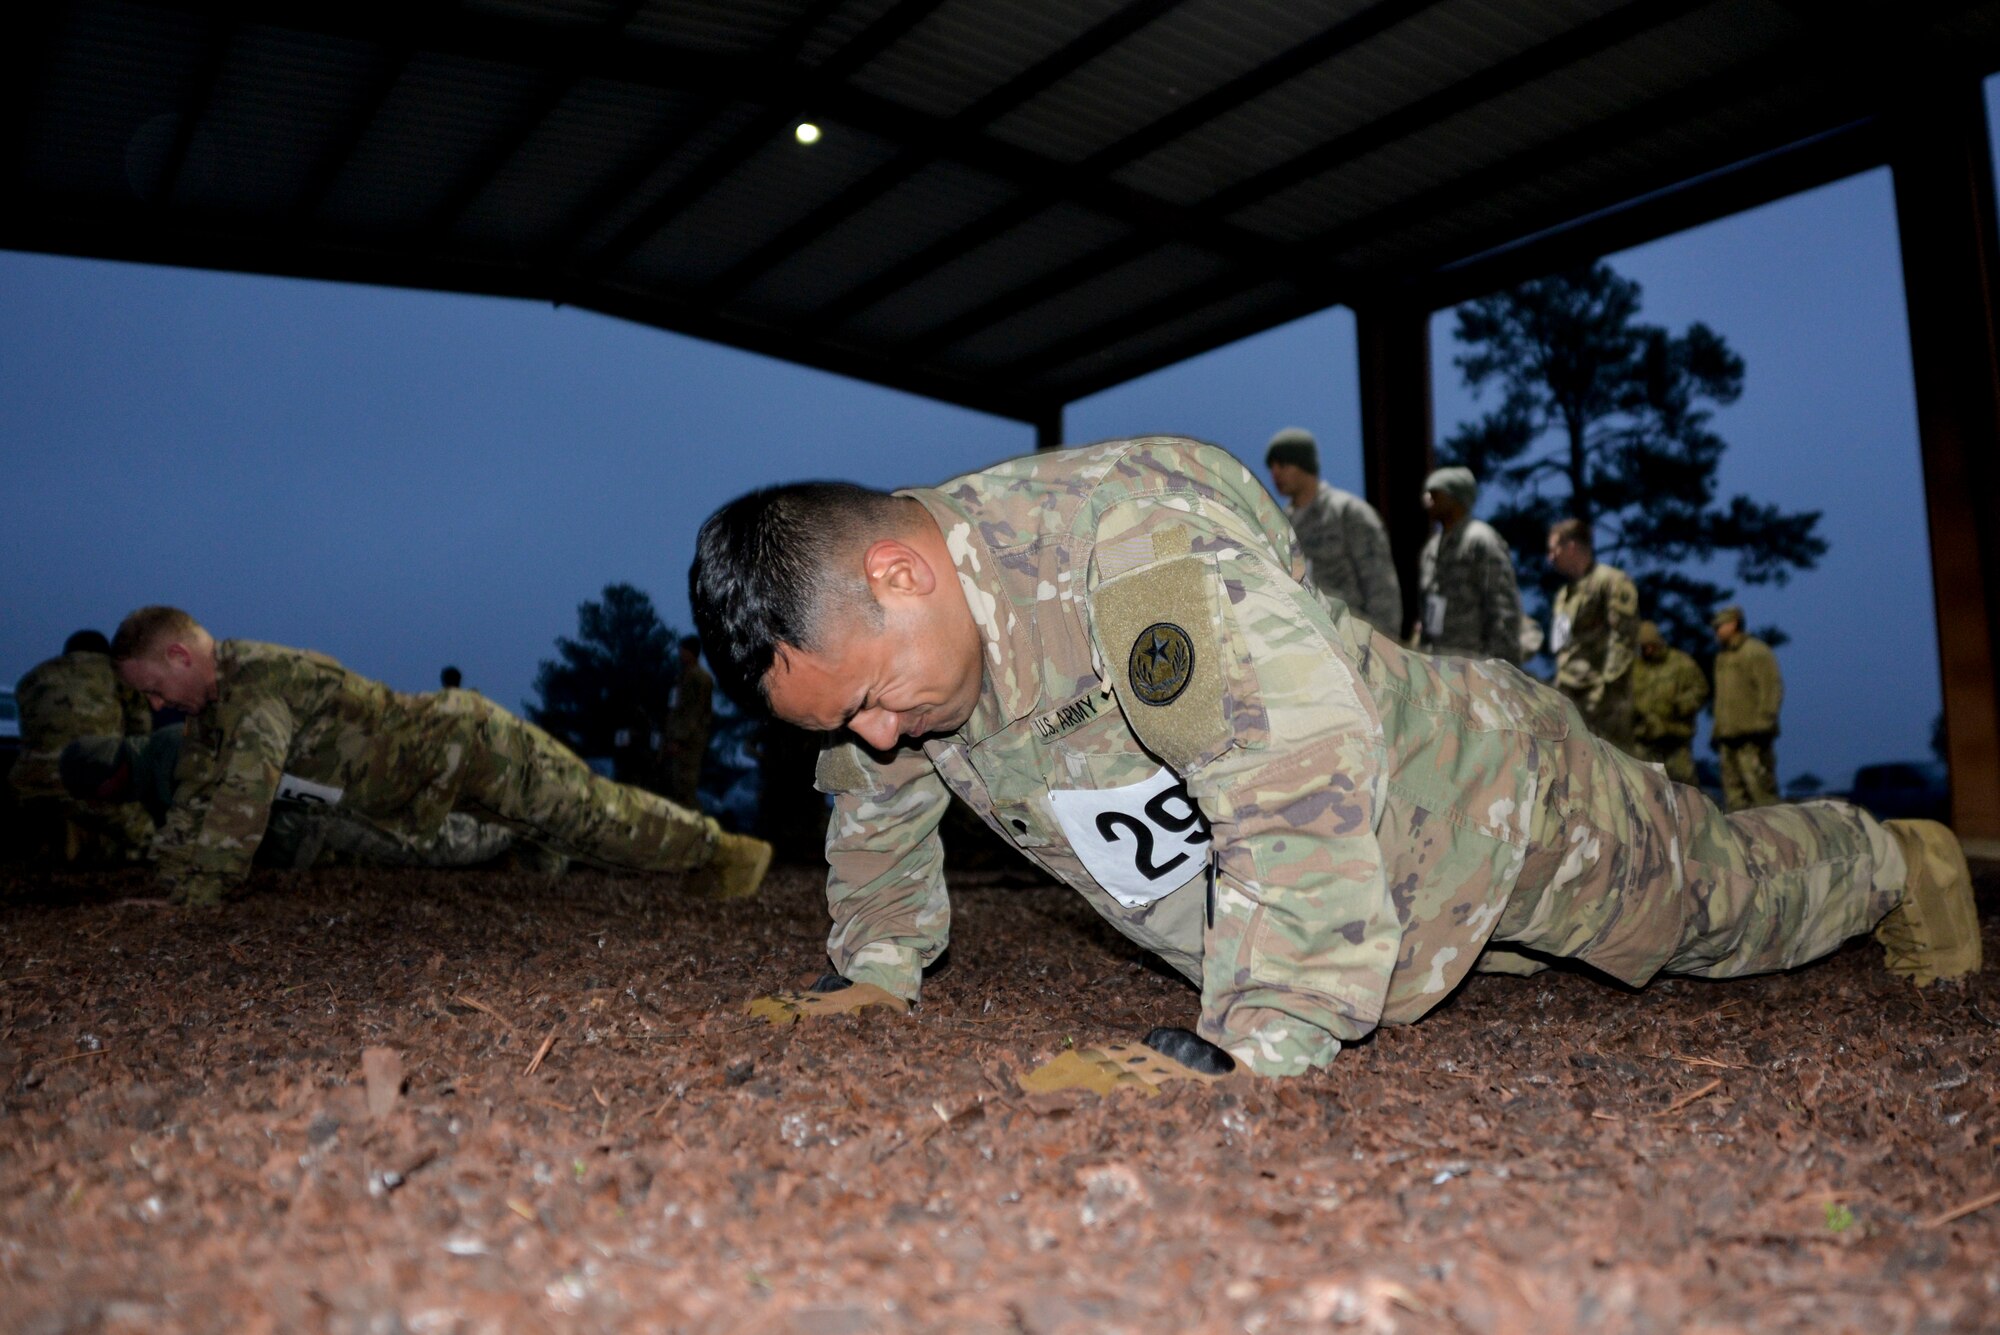 Spc. Miguel Ruiz, 100th Mobile Public Affairs Detachment, 71st Troop Command, performs as many pushups possible during the physical fitness portion of the Texas National Guard’s Best Warrior Competition held at Camp Swift, Texas Feb. 28, 2019. The physical fitness assessment test the competitors on pushups, sit-ups and a four-mile run. (Texas Air National Guard photo by Senior Airman Bryan Swink)